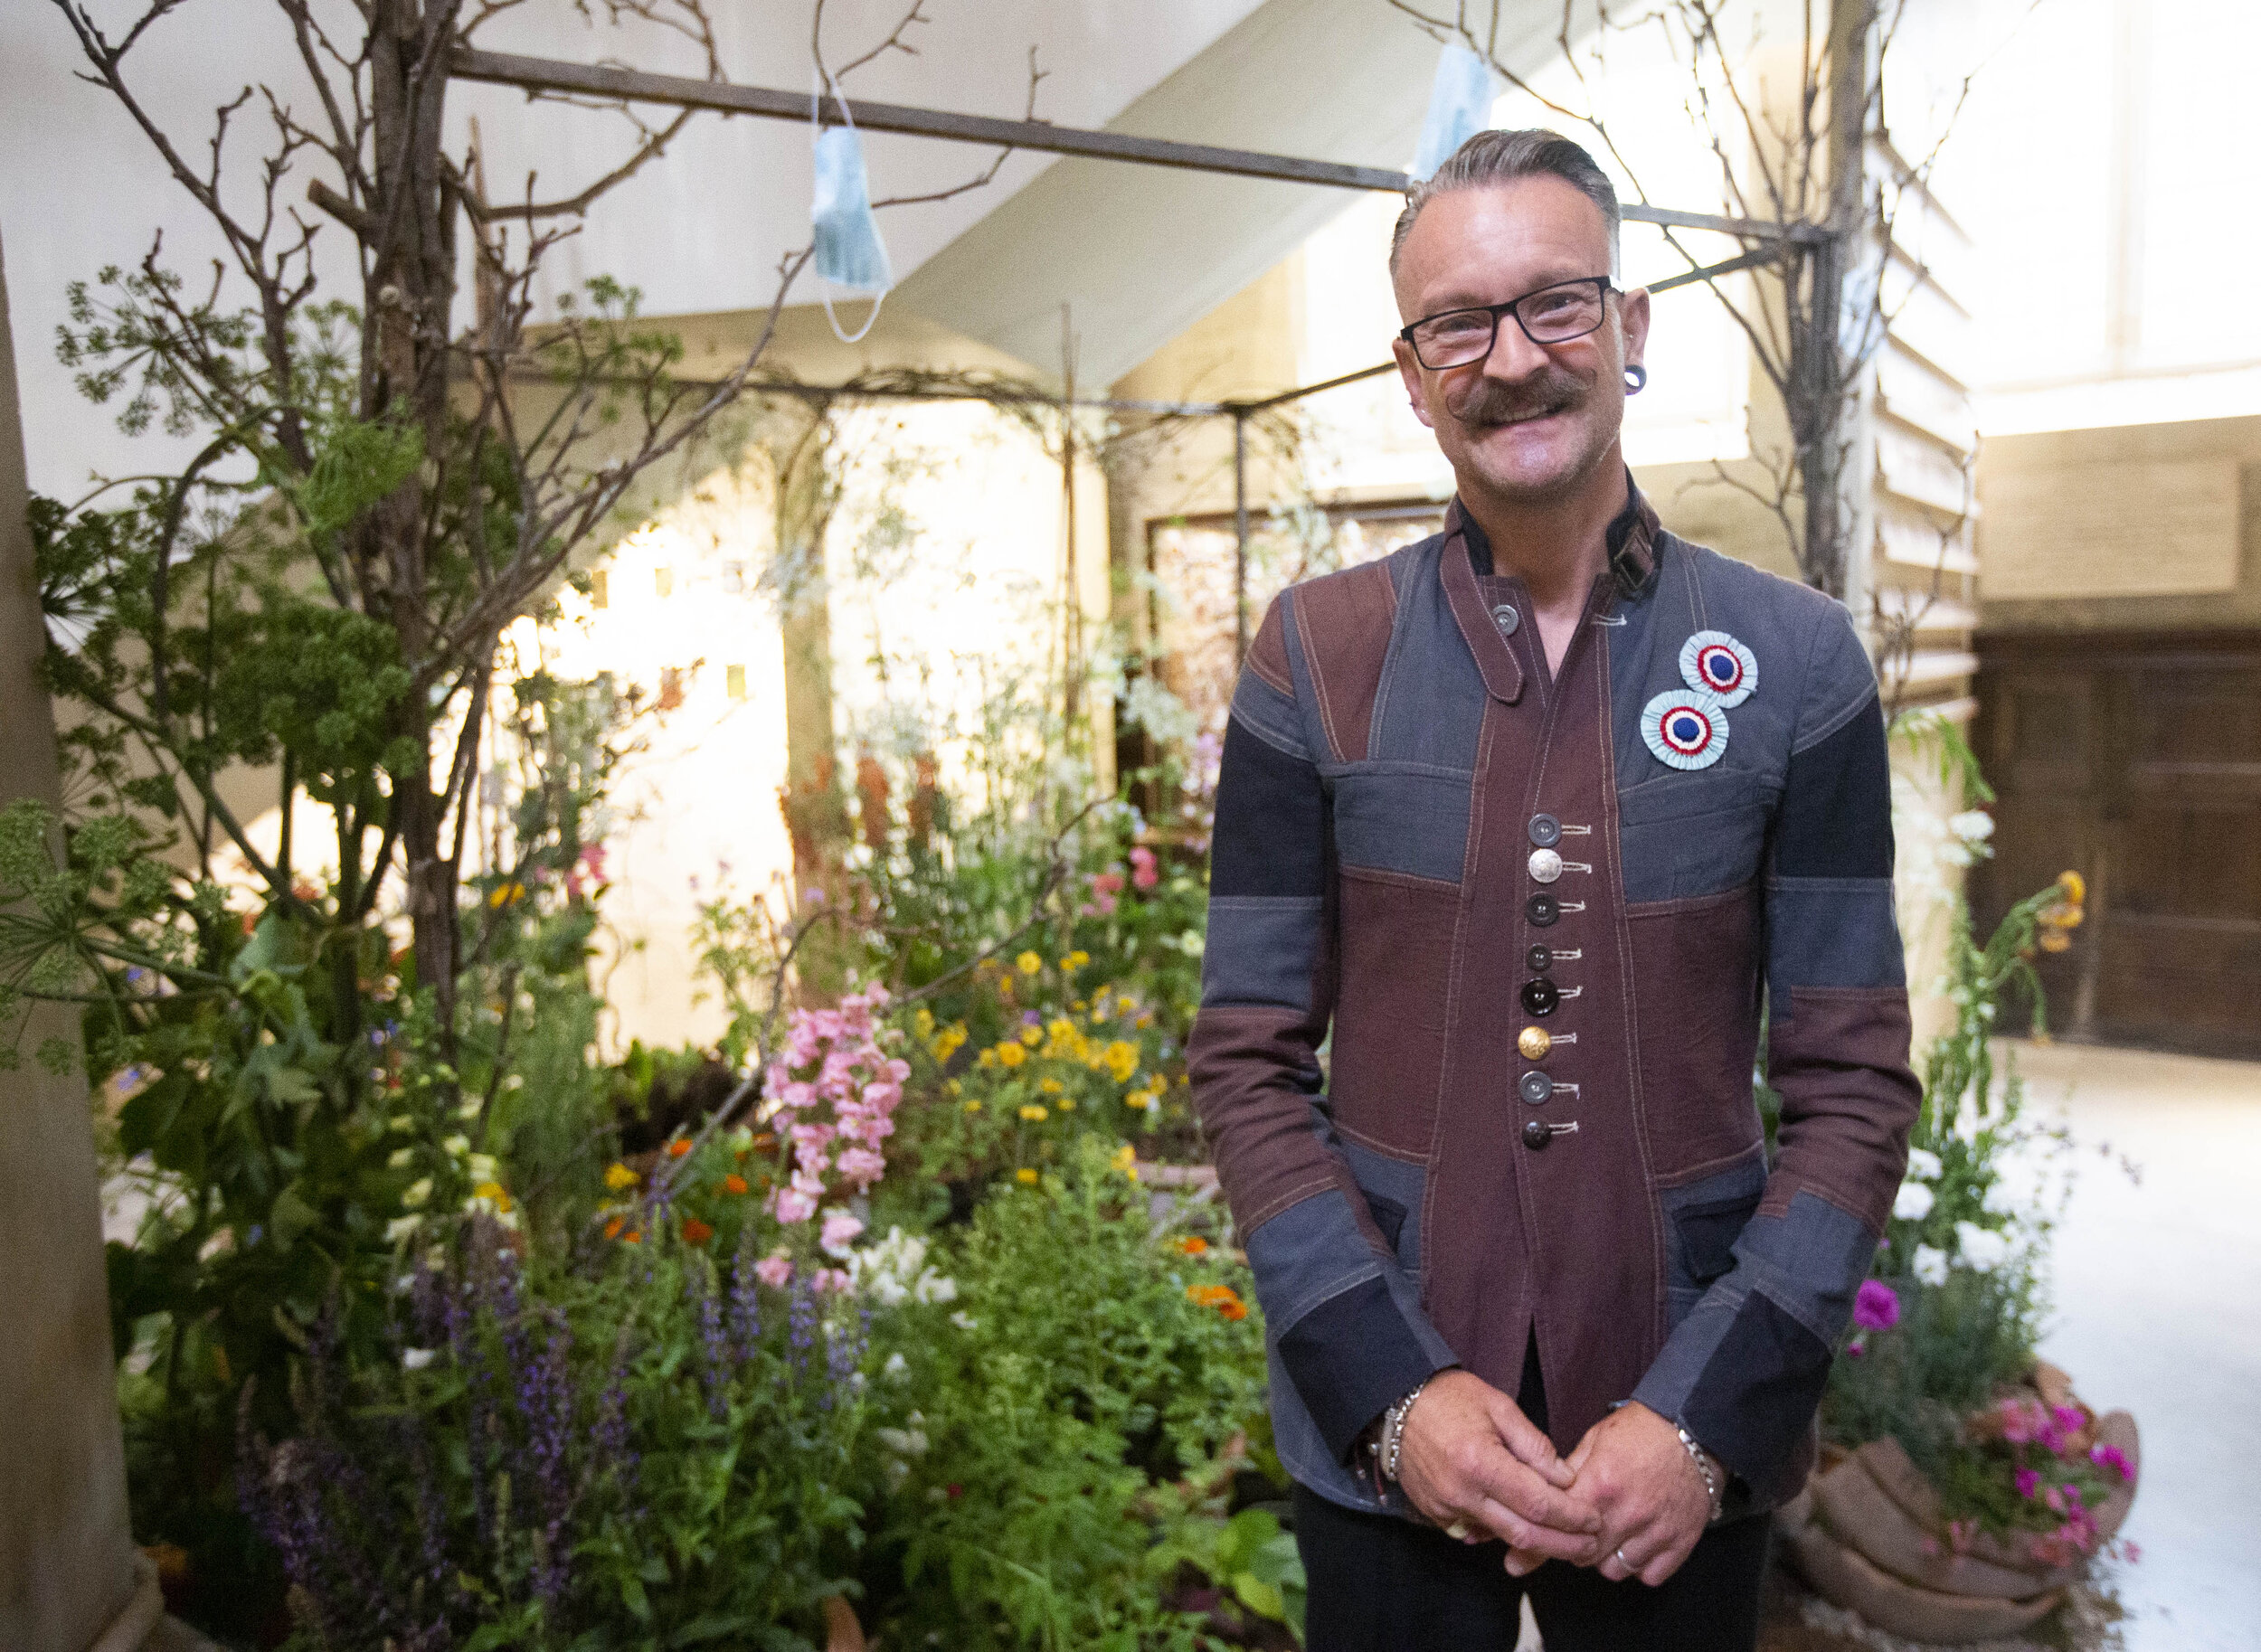 Above: Florist Simon Lycett is exhibiting at The Garden Museum as part of British Flowers Week.